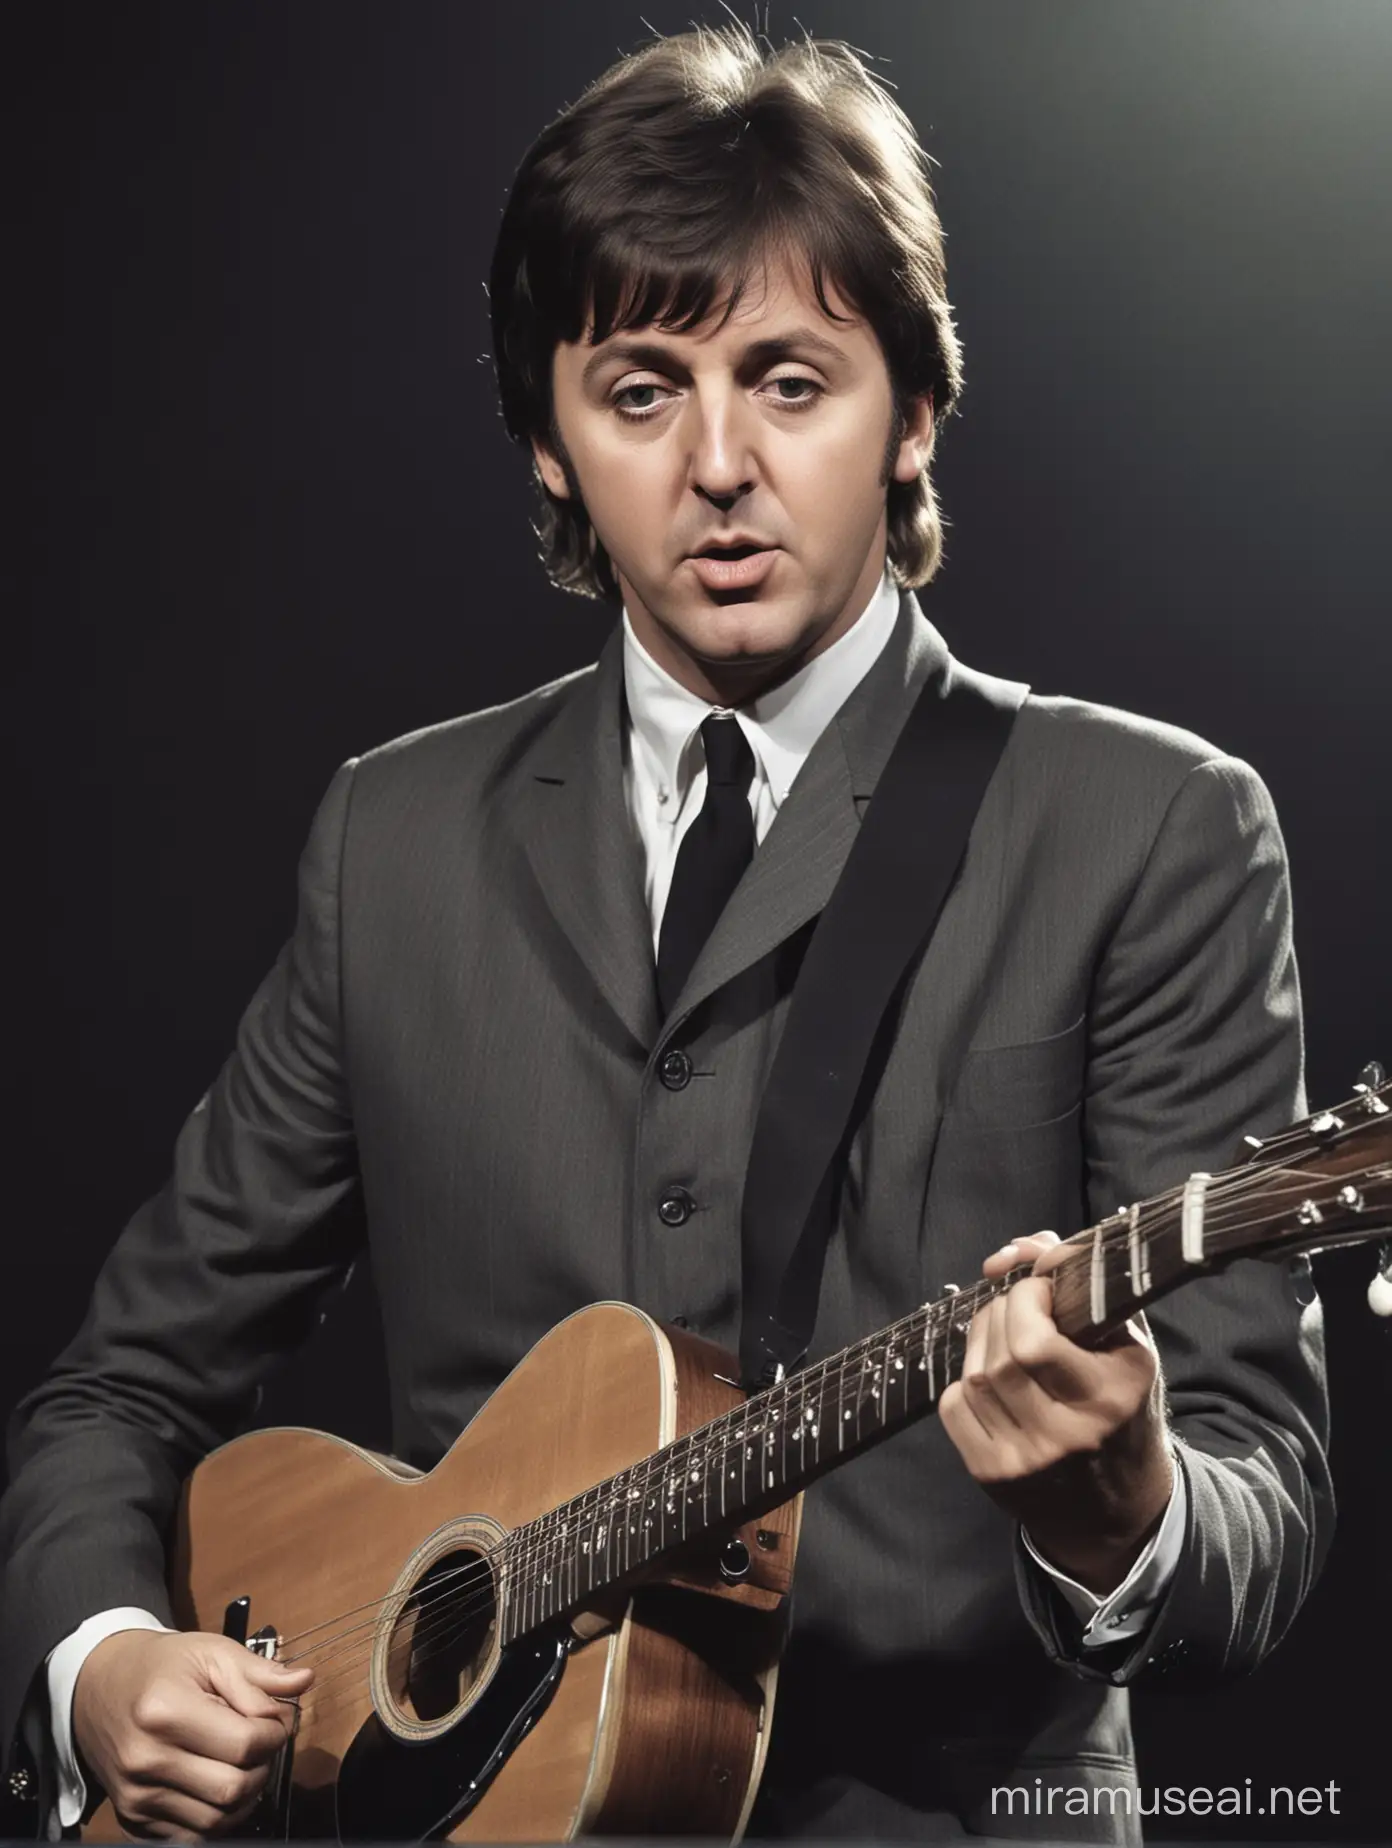 Paul McCartney in 1965 alone on stage. looking at the camera. He plays a left-handed acoustic guitar with a serious face. Photorealistic.